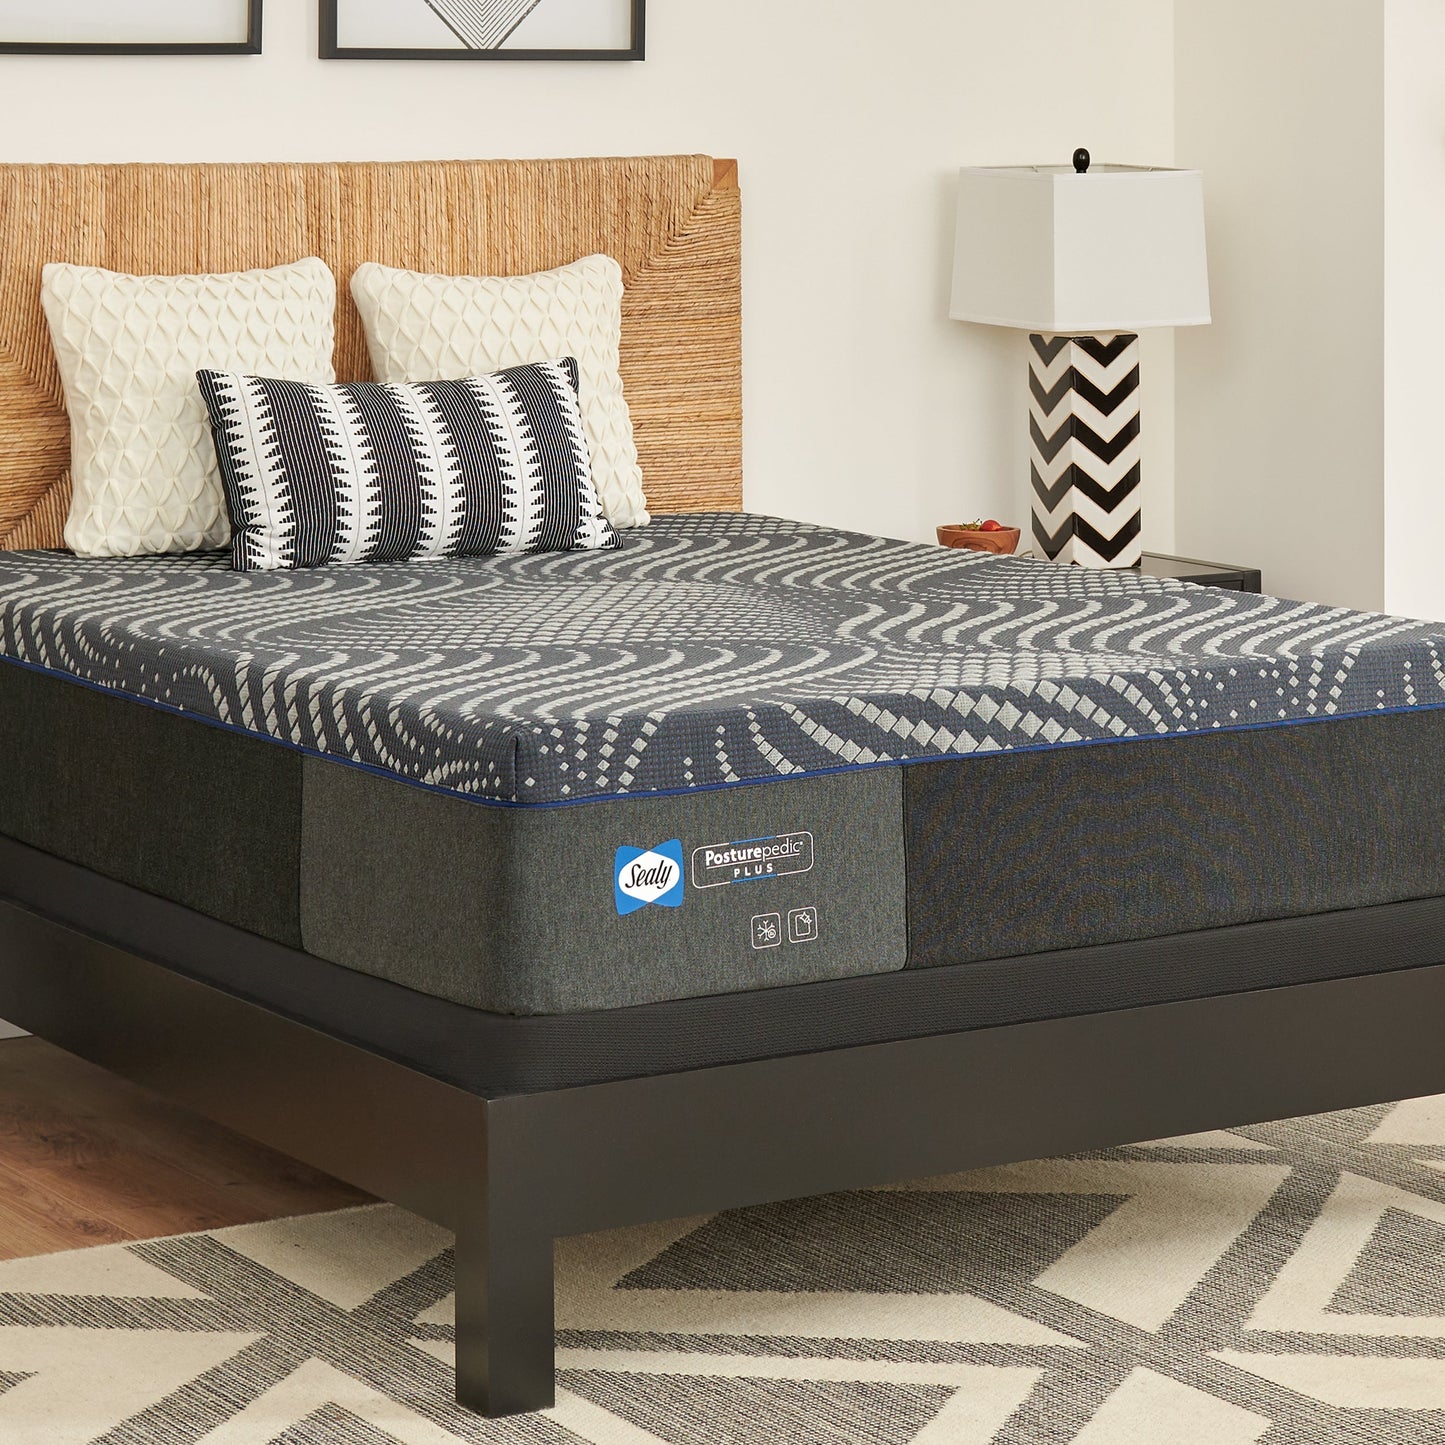 Sealy Albany Soft Mattress On Bed Frame In Bedroom